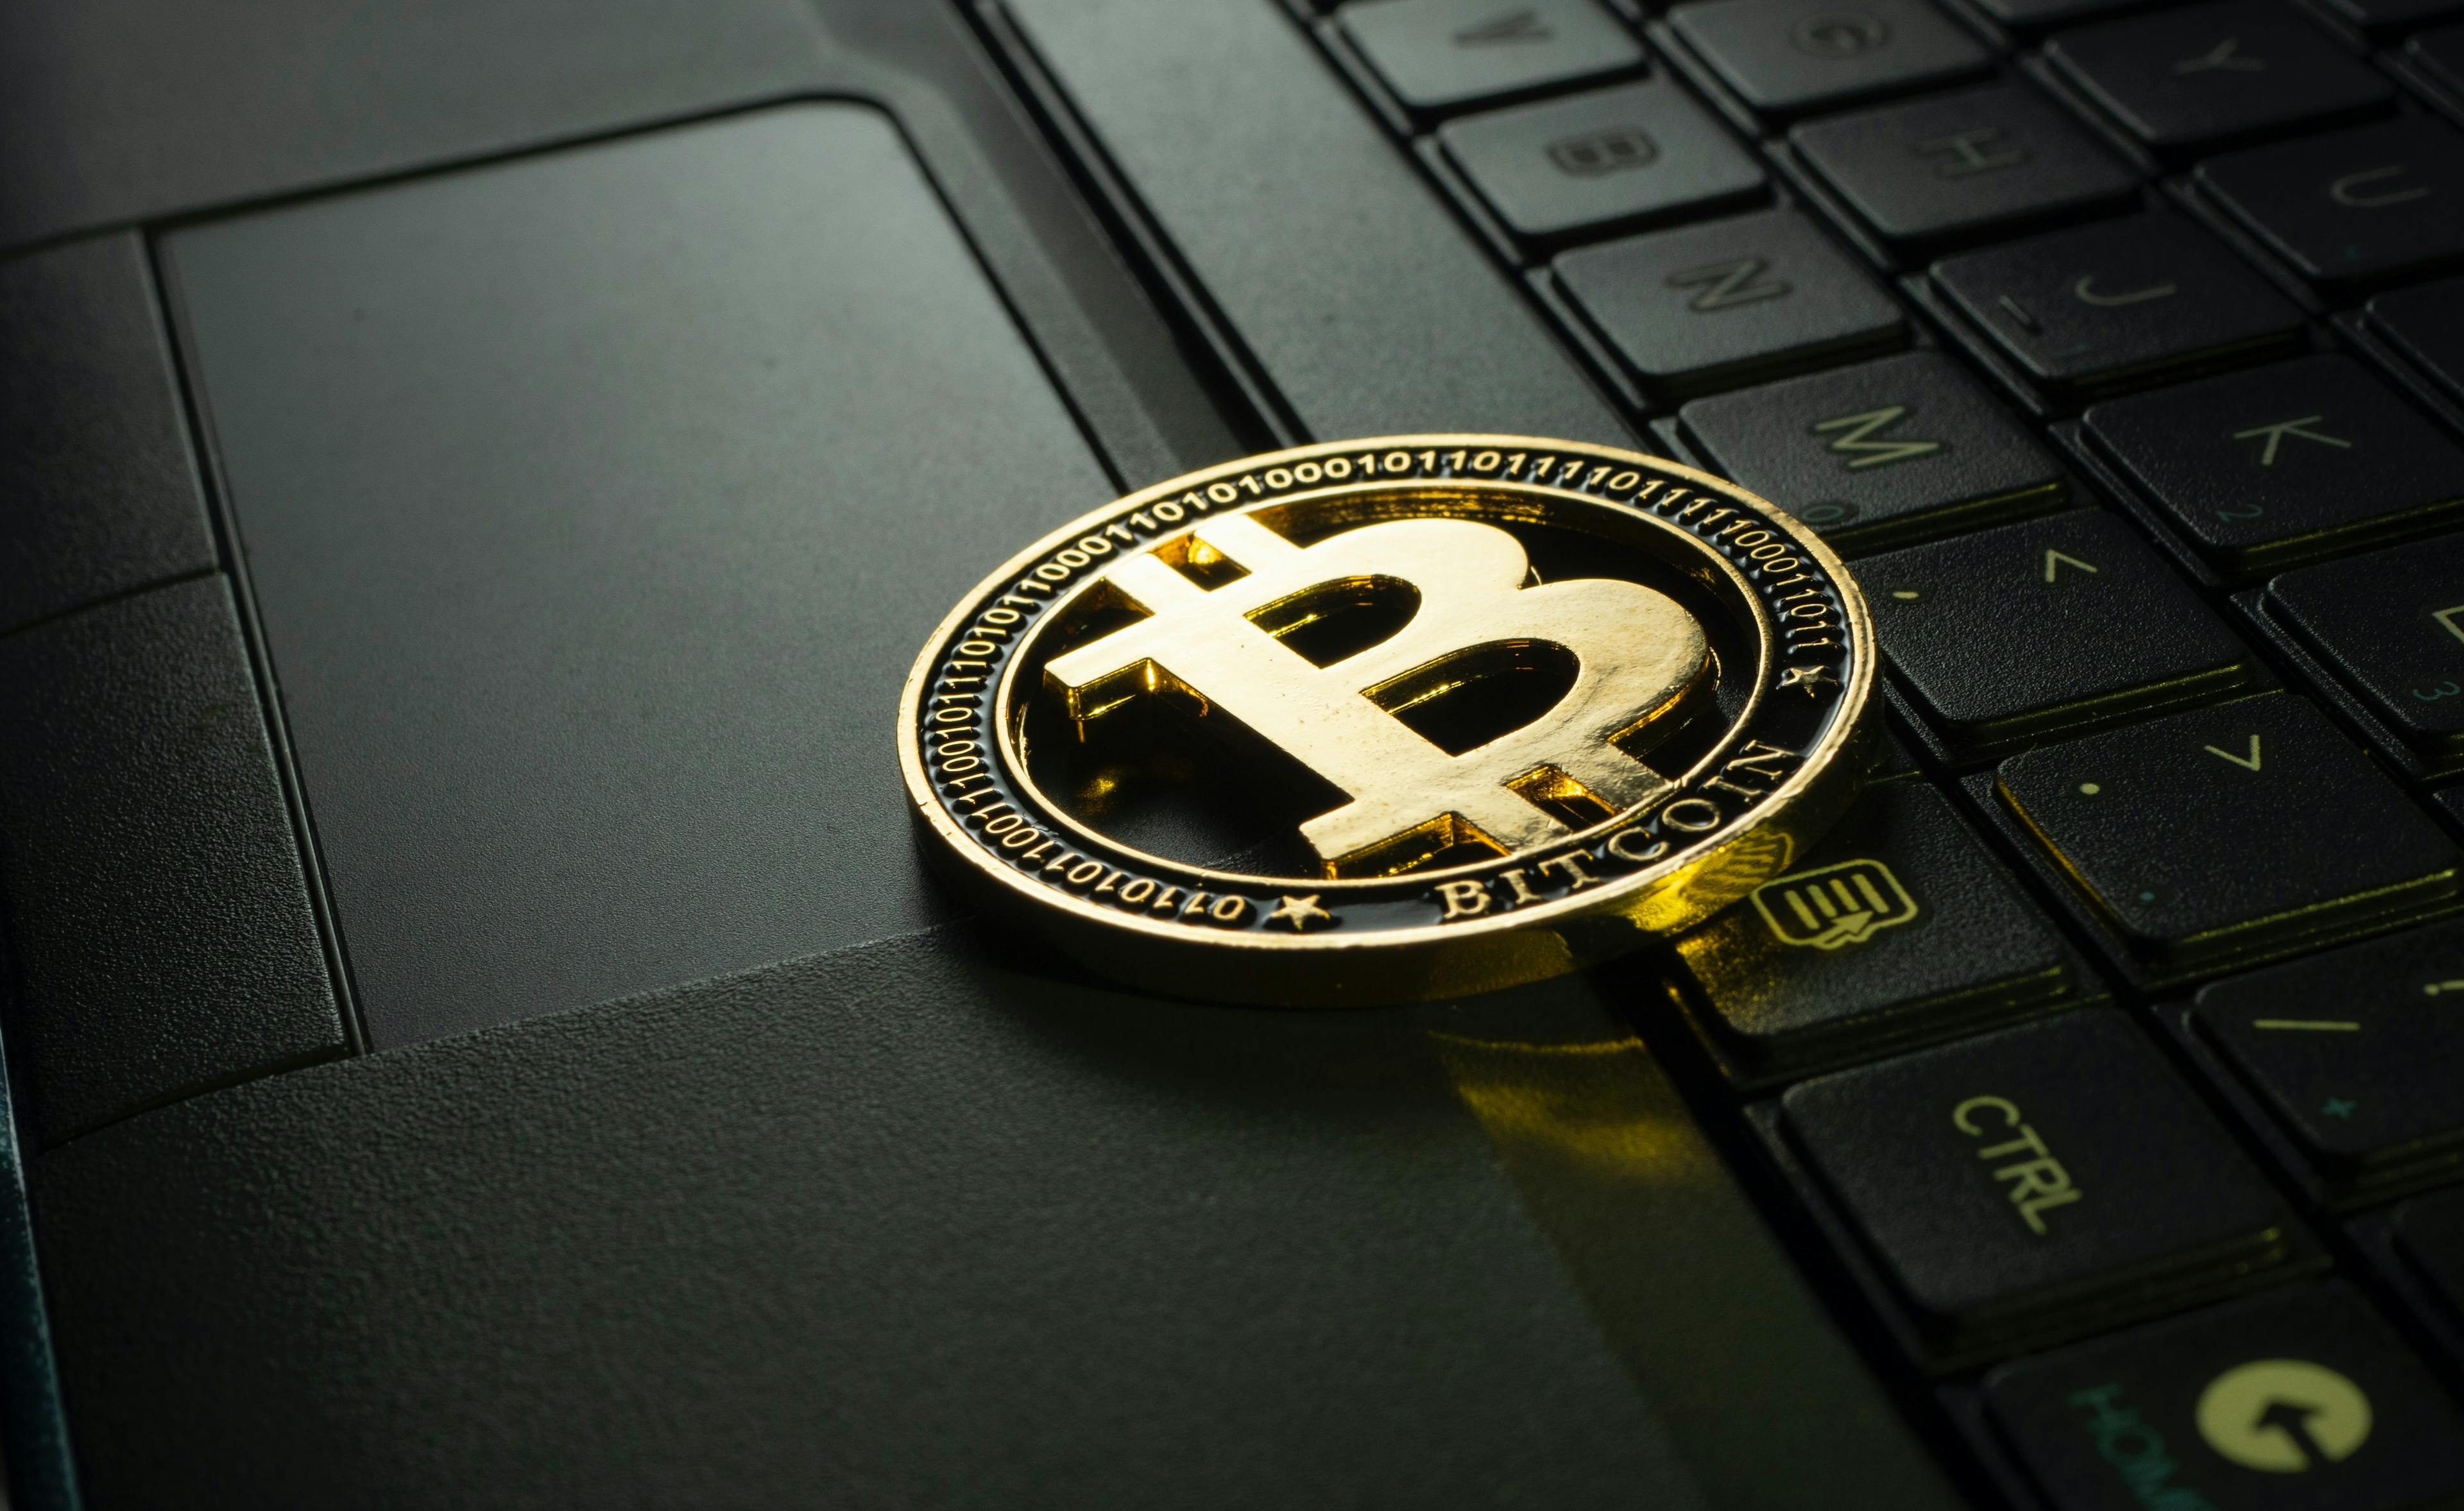 Digital Gold: Bitcoin's Comparison to Real Gold